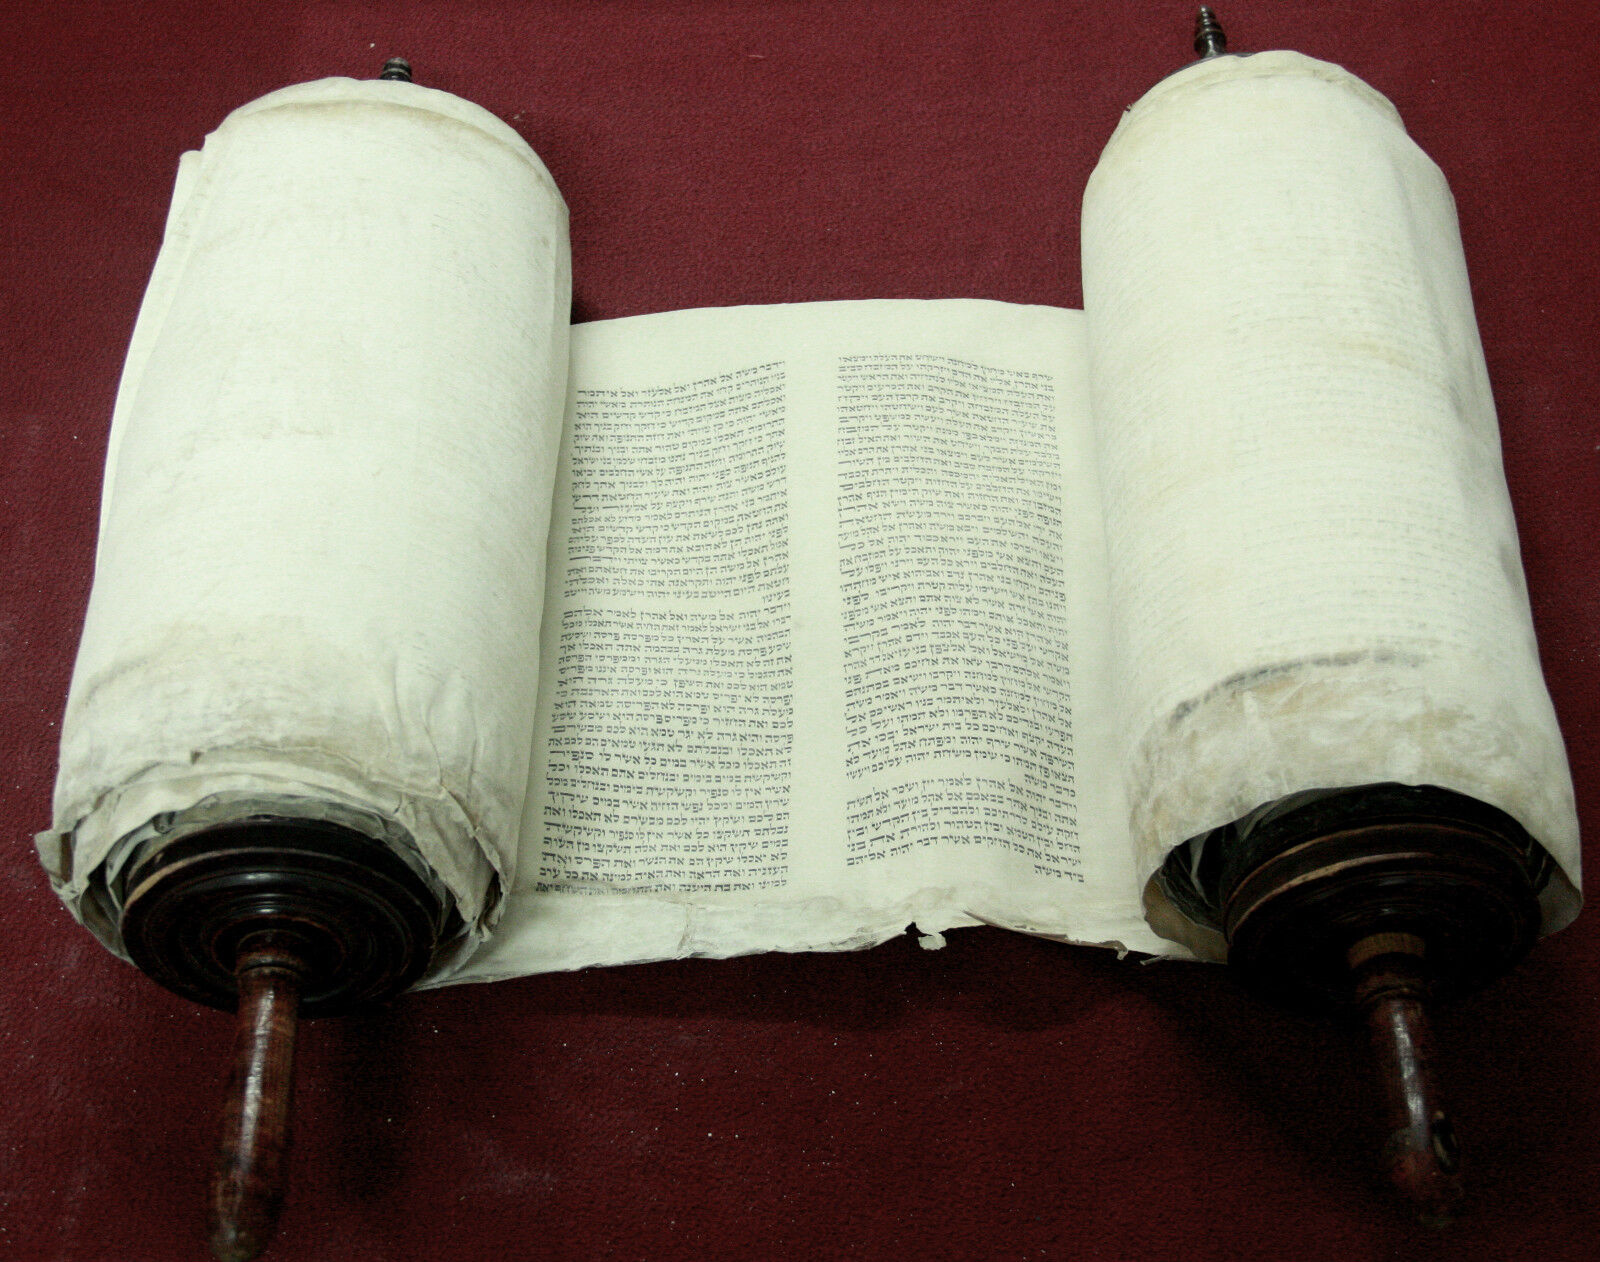 GHETTO LODZ HISTORICAL COMPLETE TORAH BIBLE SCROLL SAVED FROM THE NAZIS JUDAICA